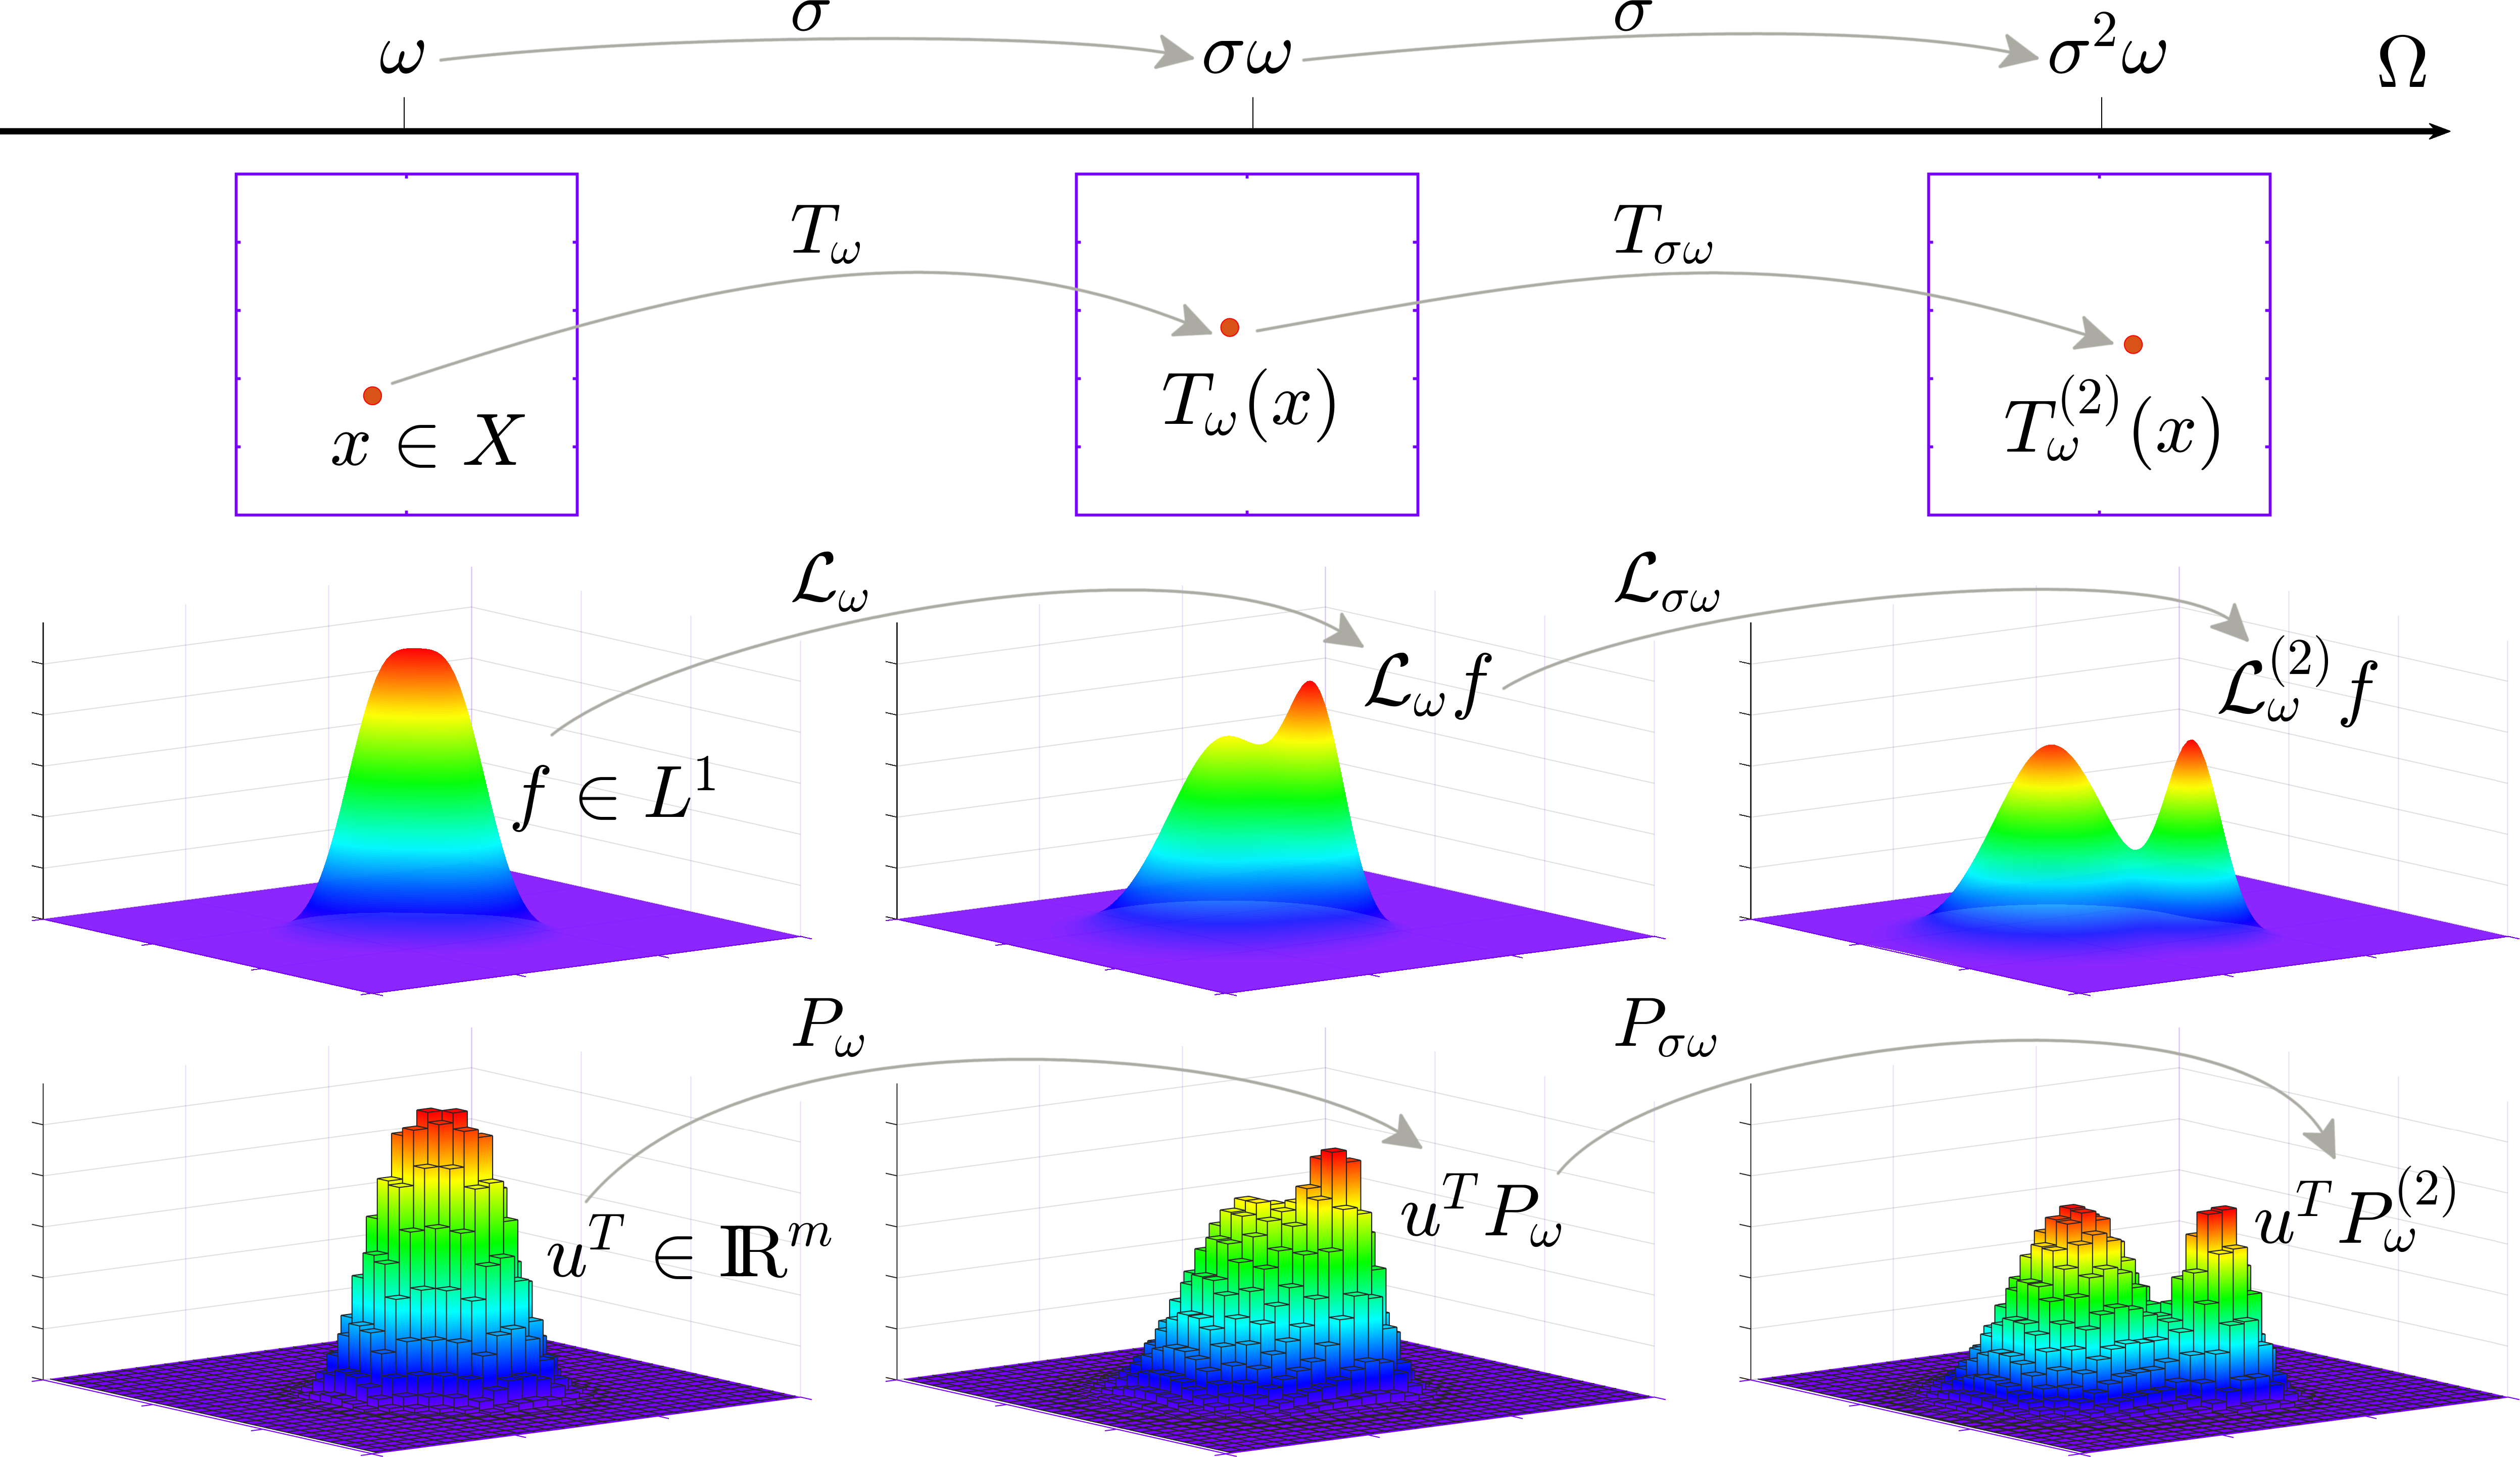 Dynamical System view from tracking particles to following densities